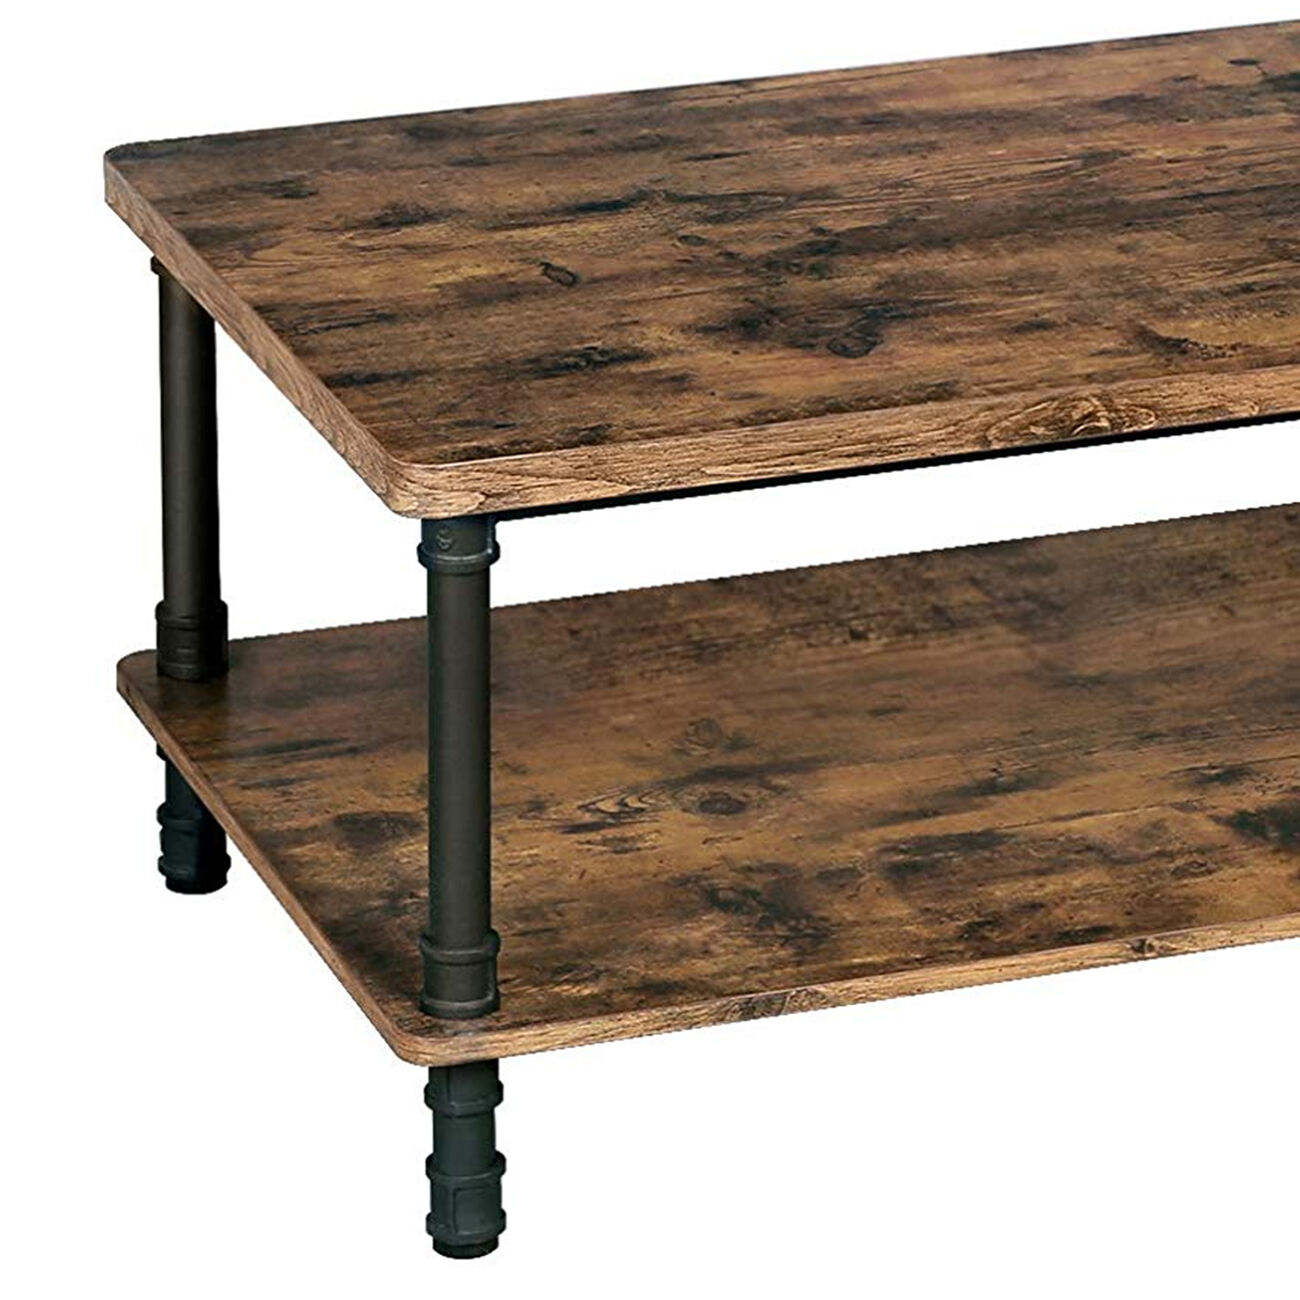 Wooden Coffee Table with 1 Bottom Shelf and Grain Details, Brown